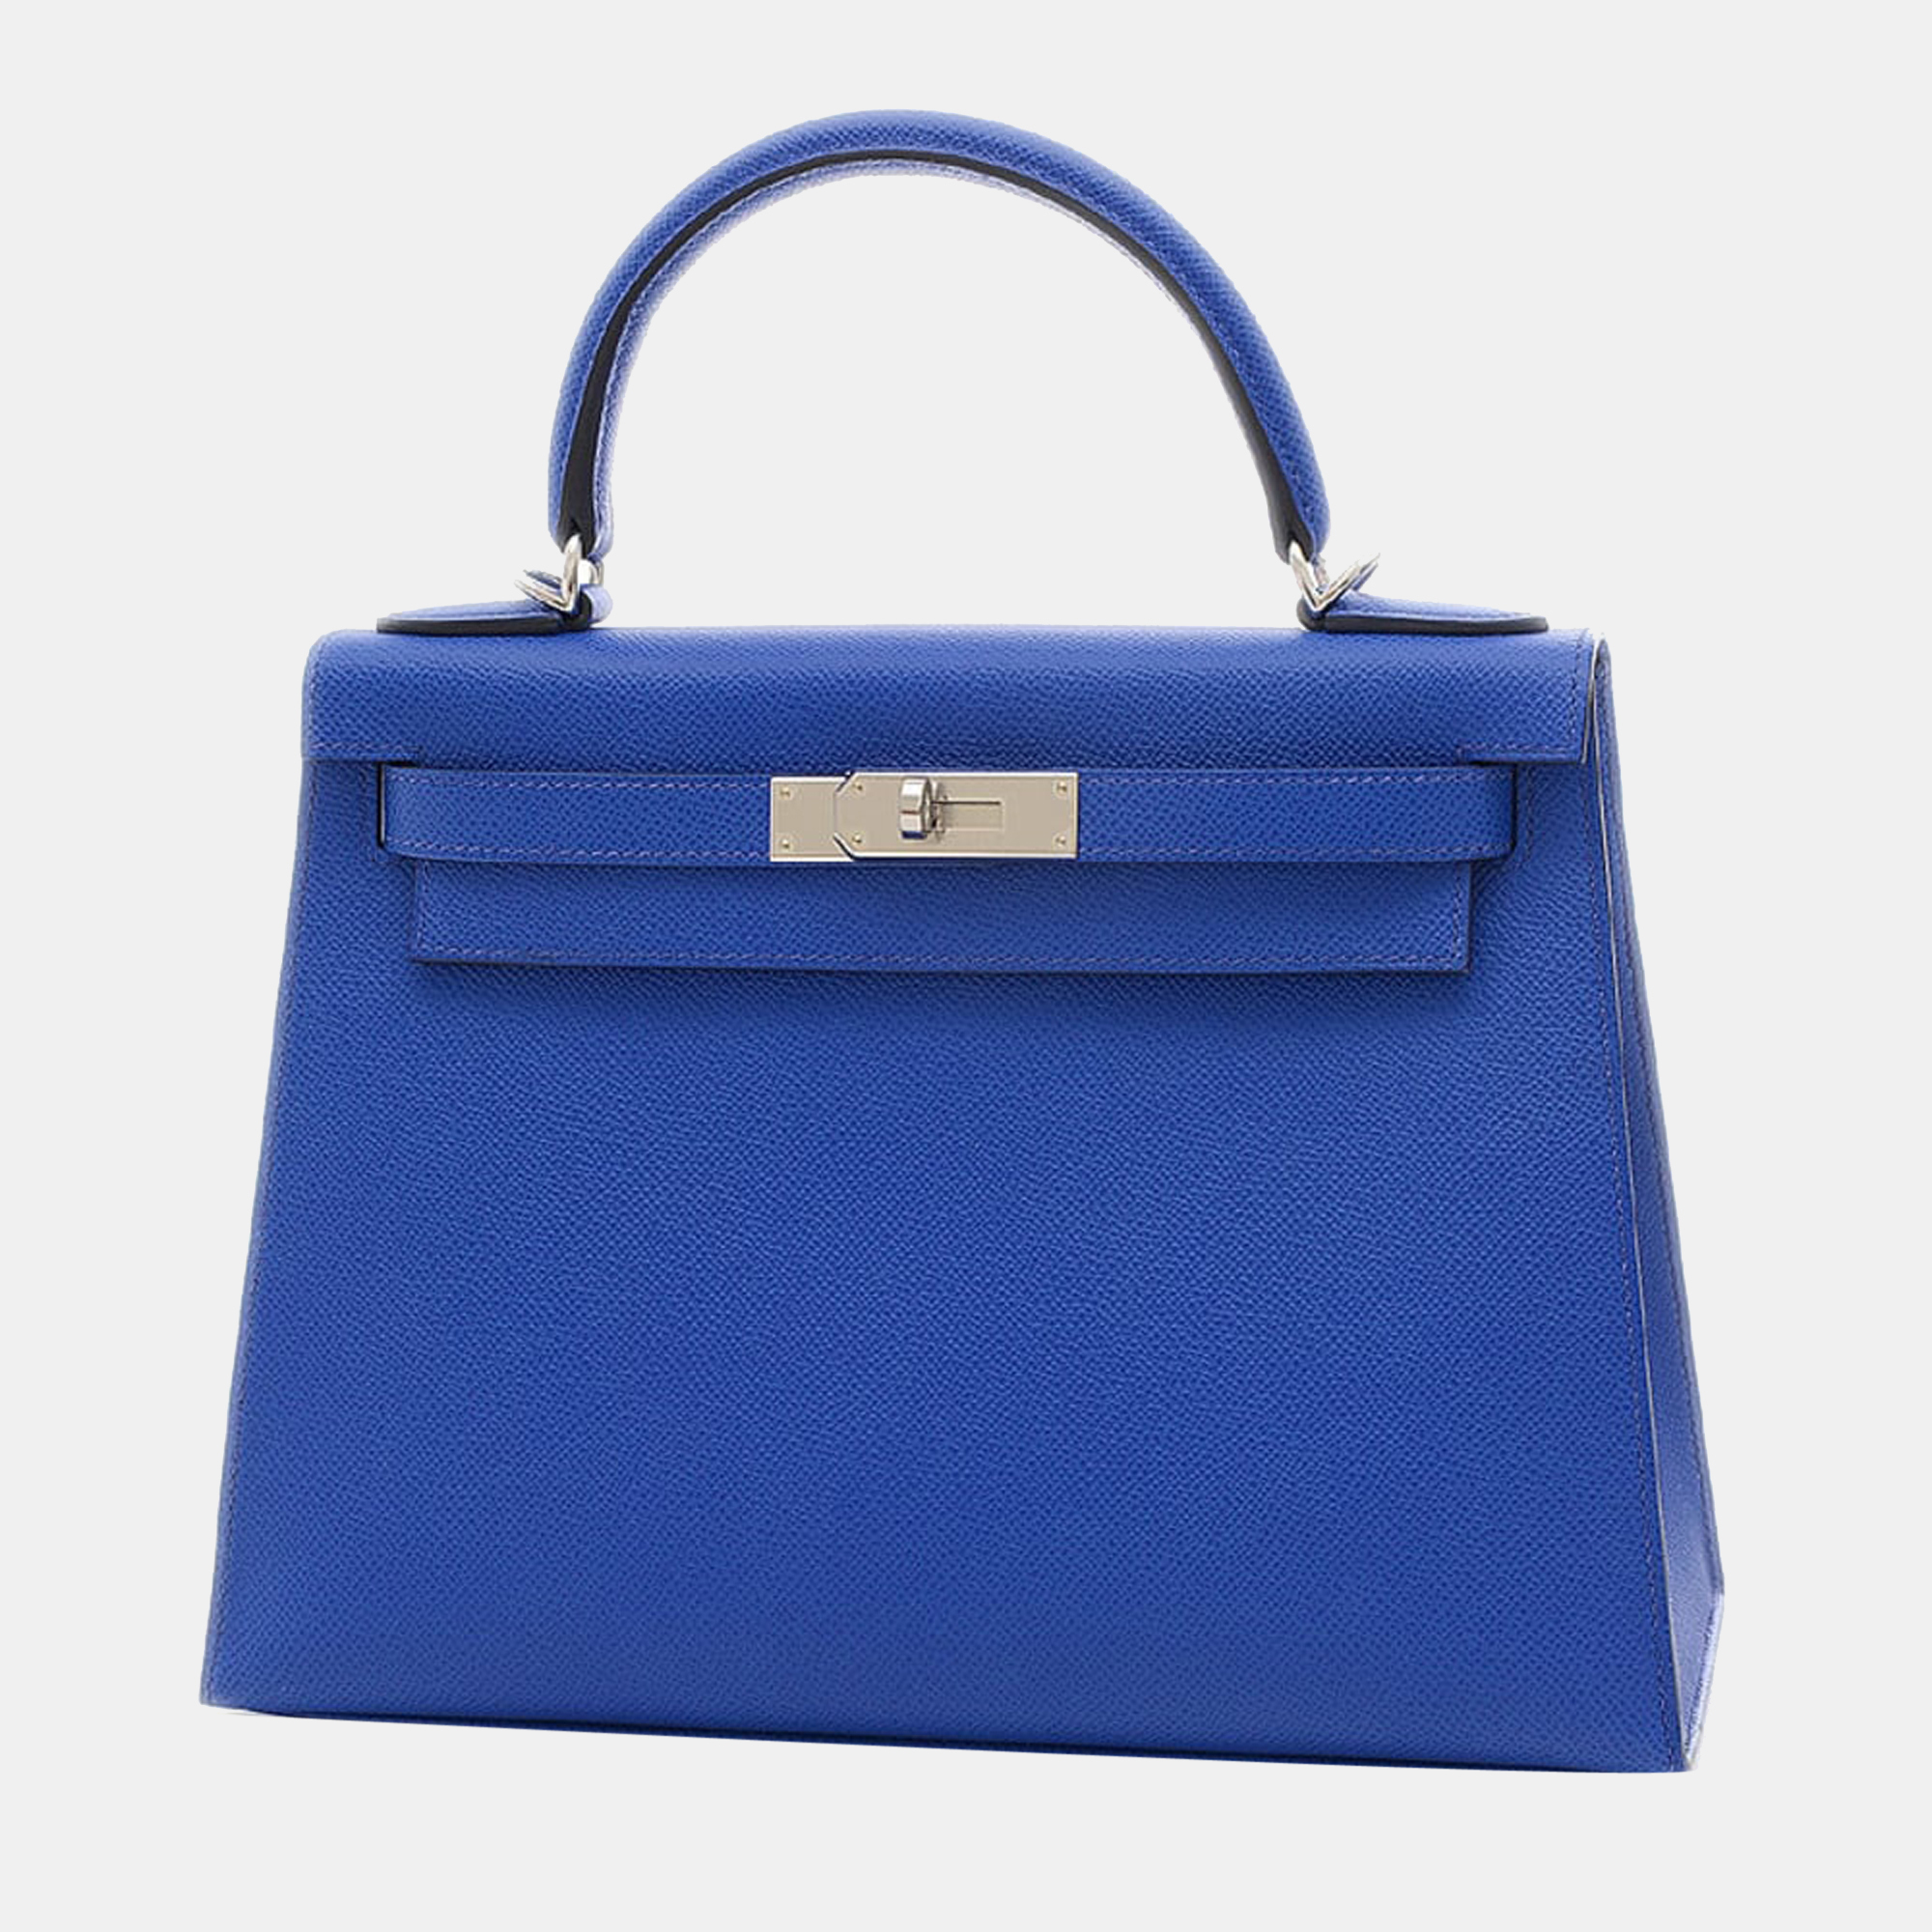 Hermes Kelly 28 Verso Outer Stitched Epson Handbag Blue France/Cassis Silver Metal Fittings U Engraved